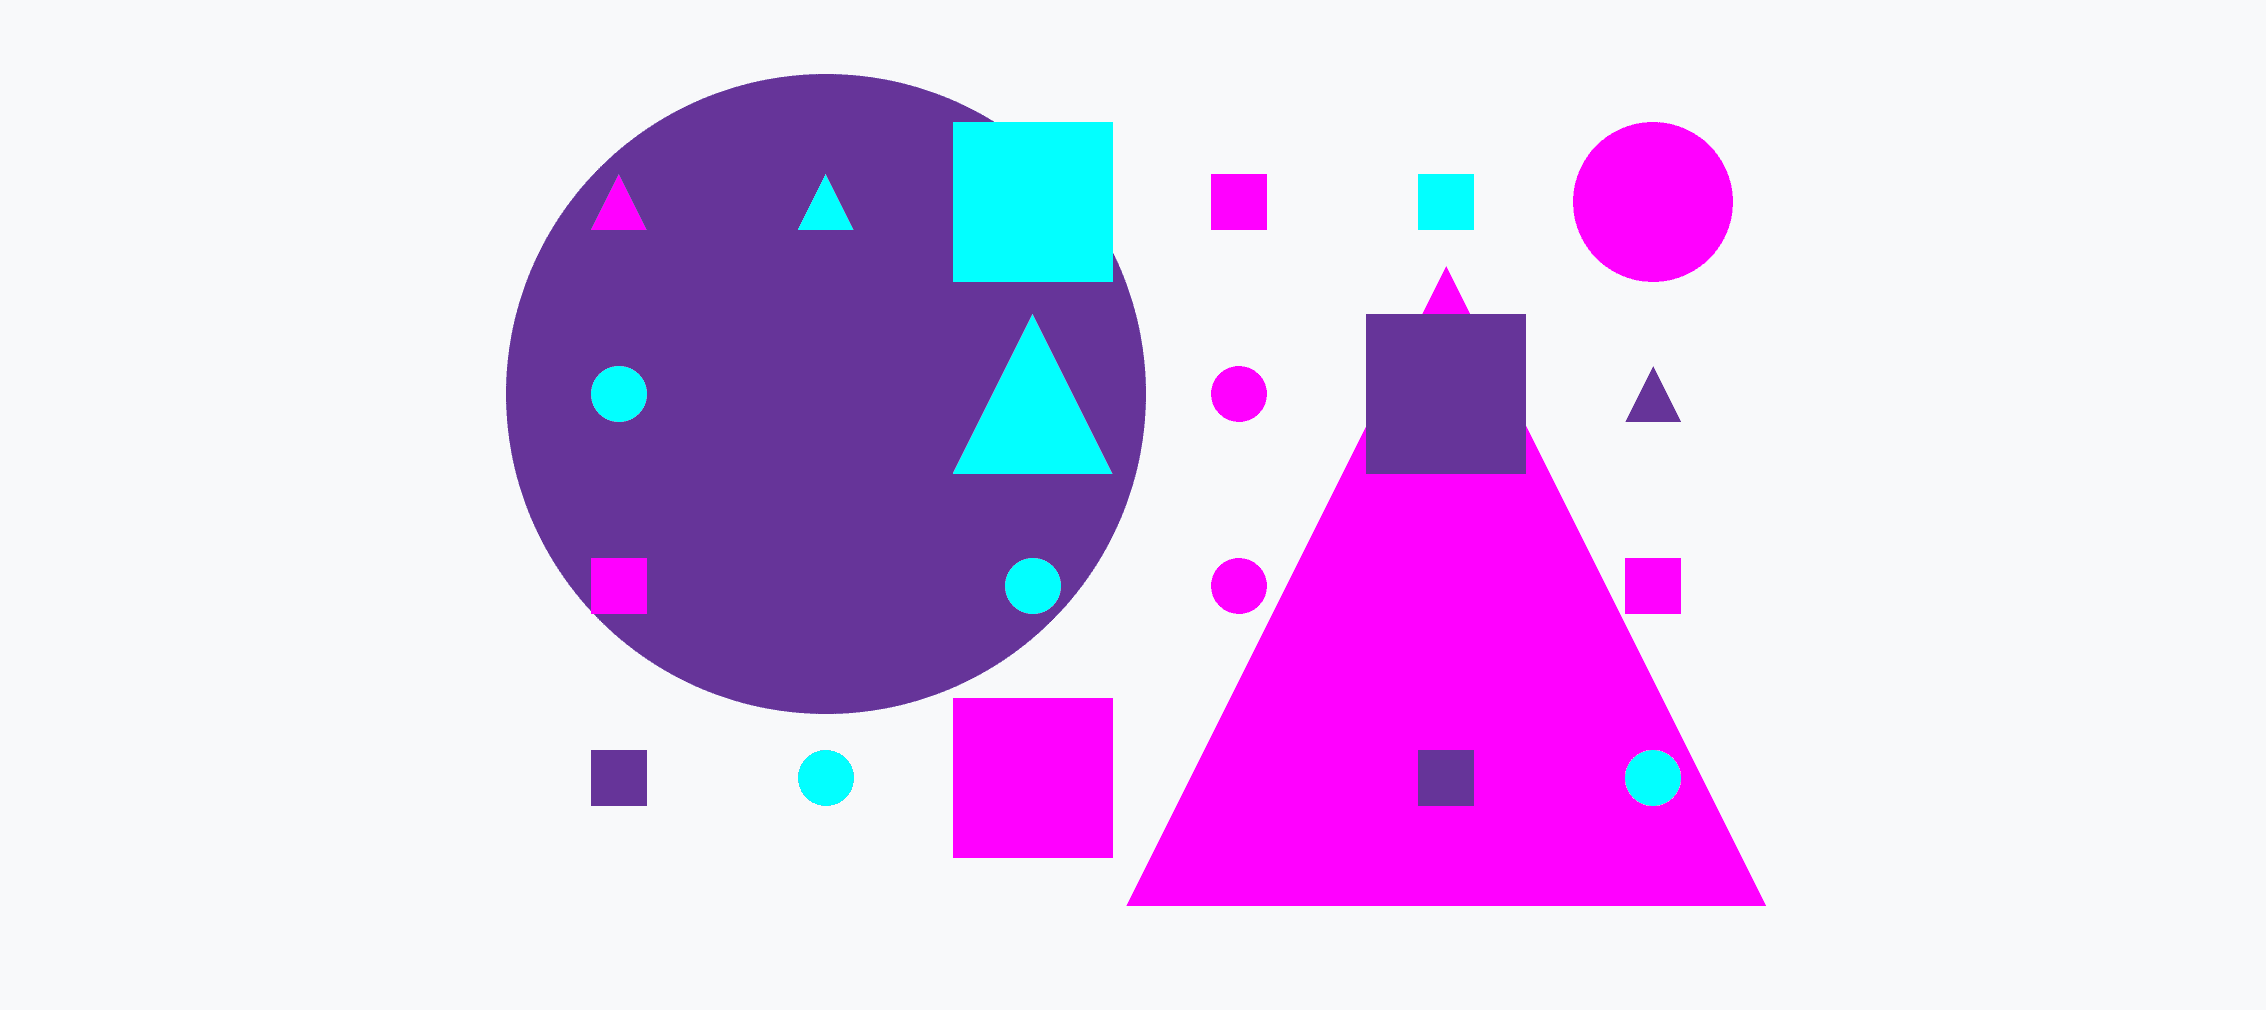 A colorful grid of small and large circles, triangles and squares.